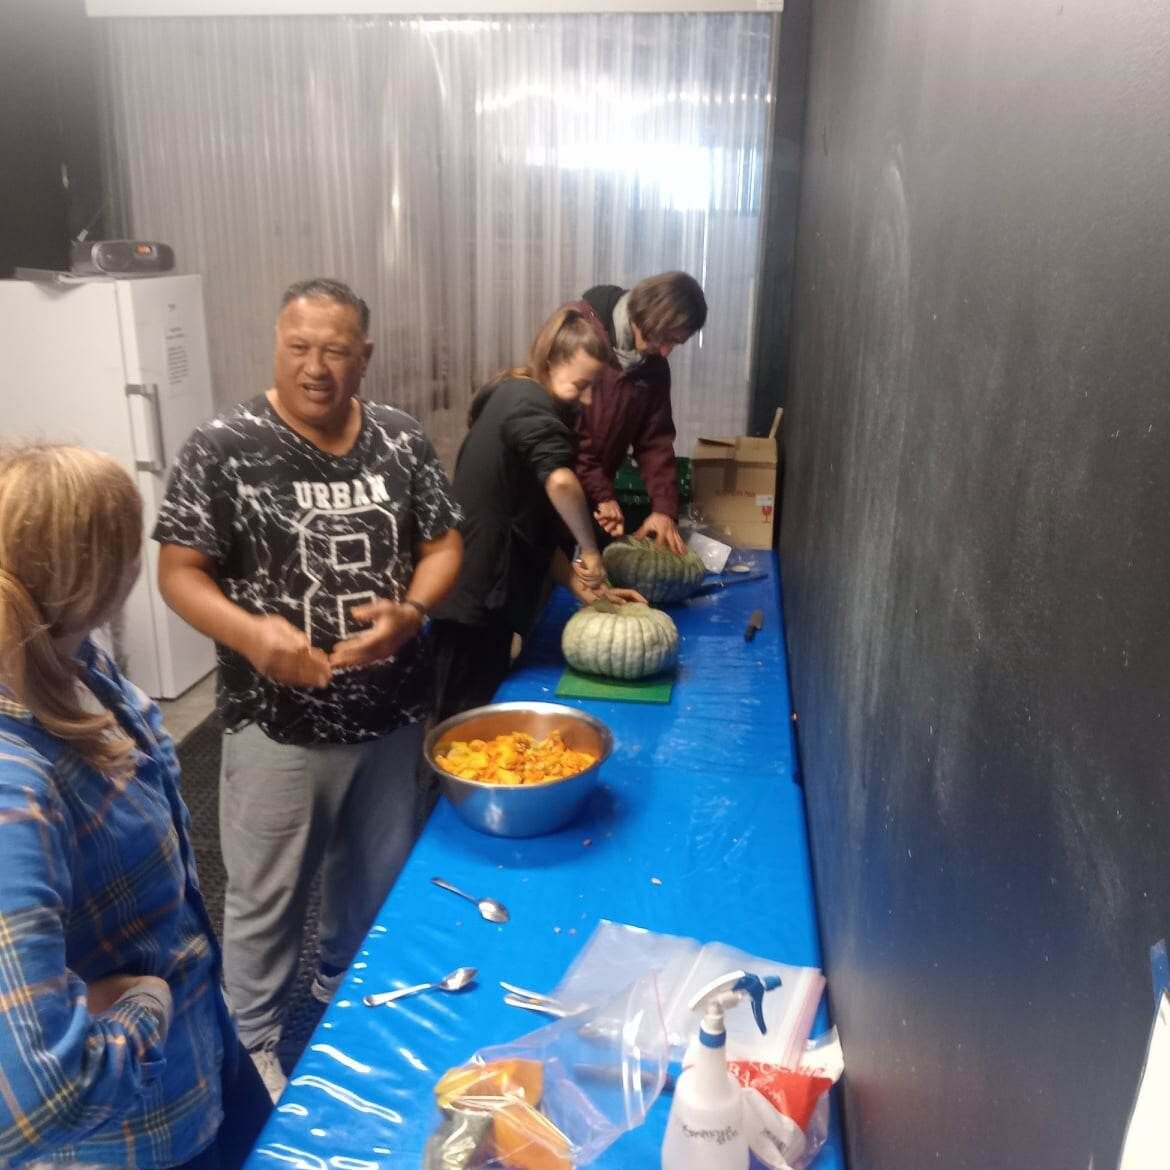 Our Friday gardening session in the māra was rained off today but we kept ourselves busy (and entertained!) with inside jobs at The Remakery.

After gathering around the propagation table to sow seeds for our dedicated volunteer bed at Umu i Te Mamak